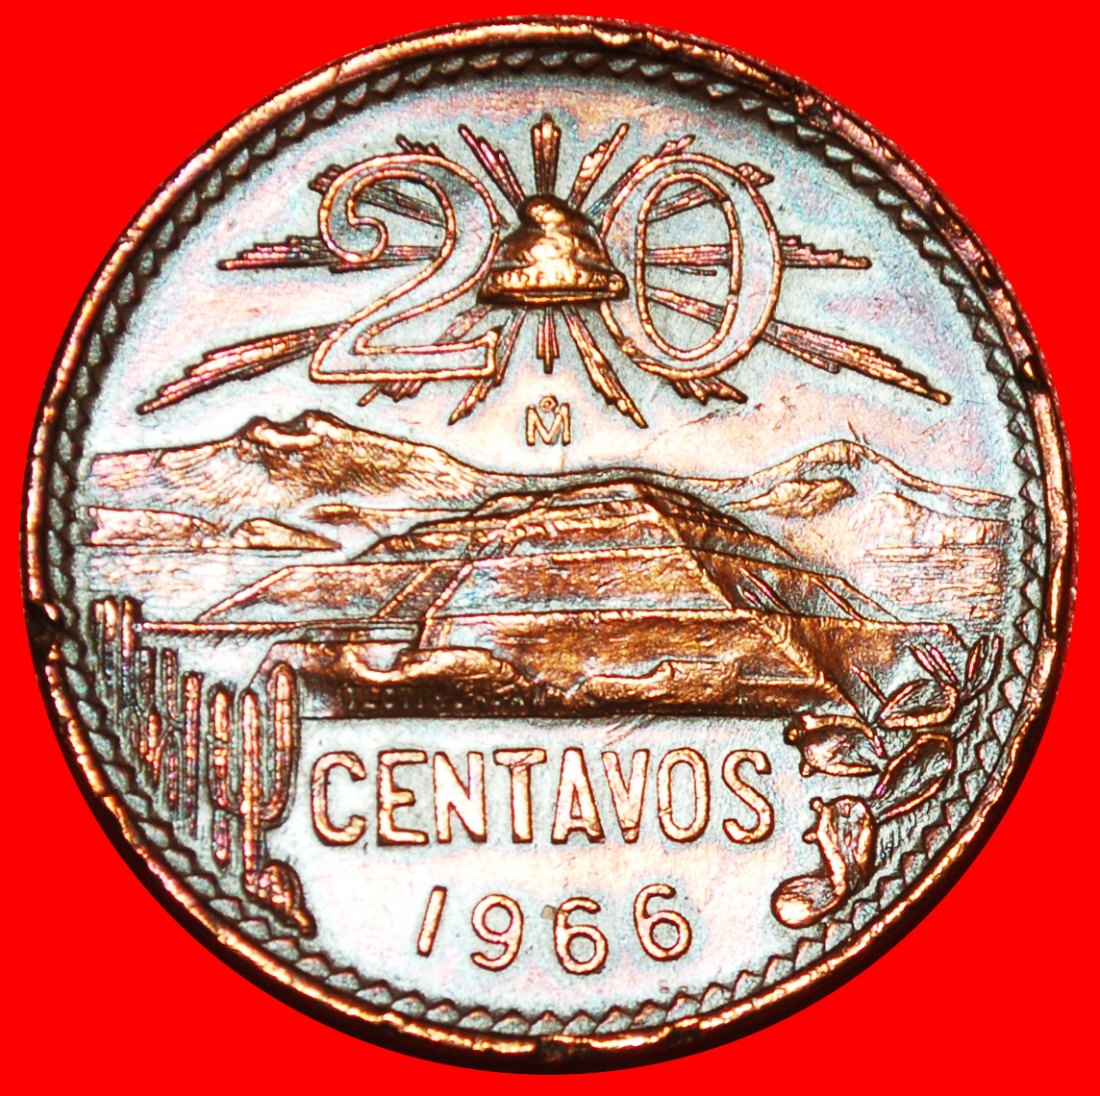  * PYRAMID OF THE SUN (1943-1974): MEXICO ★ 20 CENTAVOS 1966 ASTRONOMY! ★LOW START ★ NO RESERVE!   